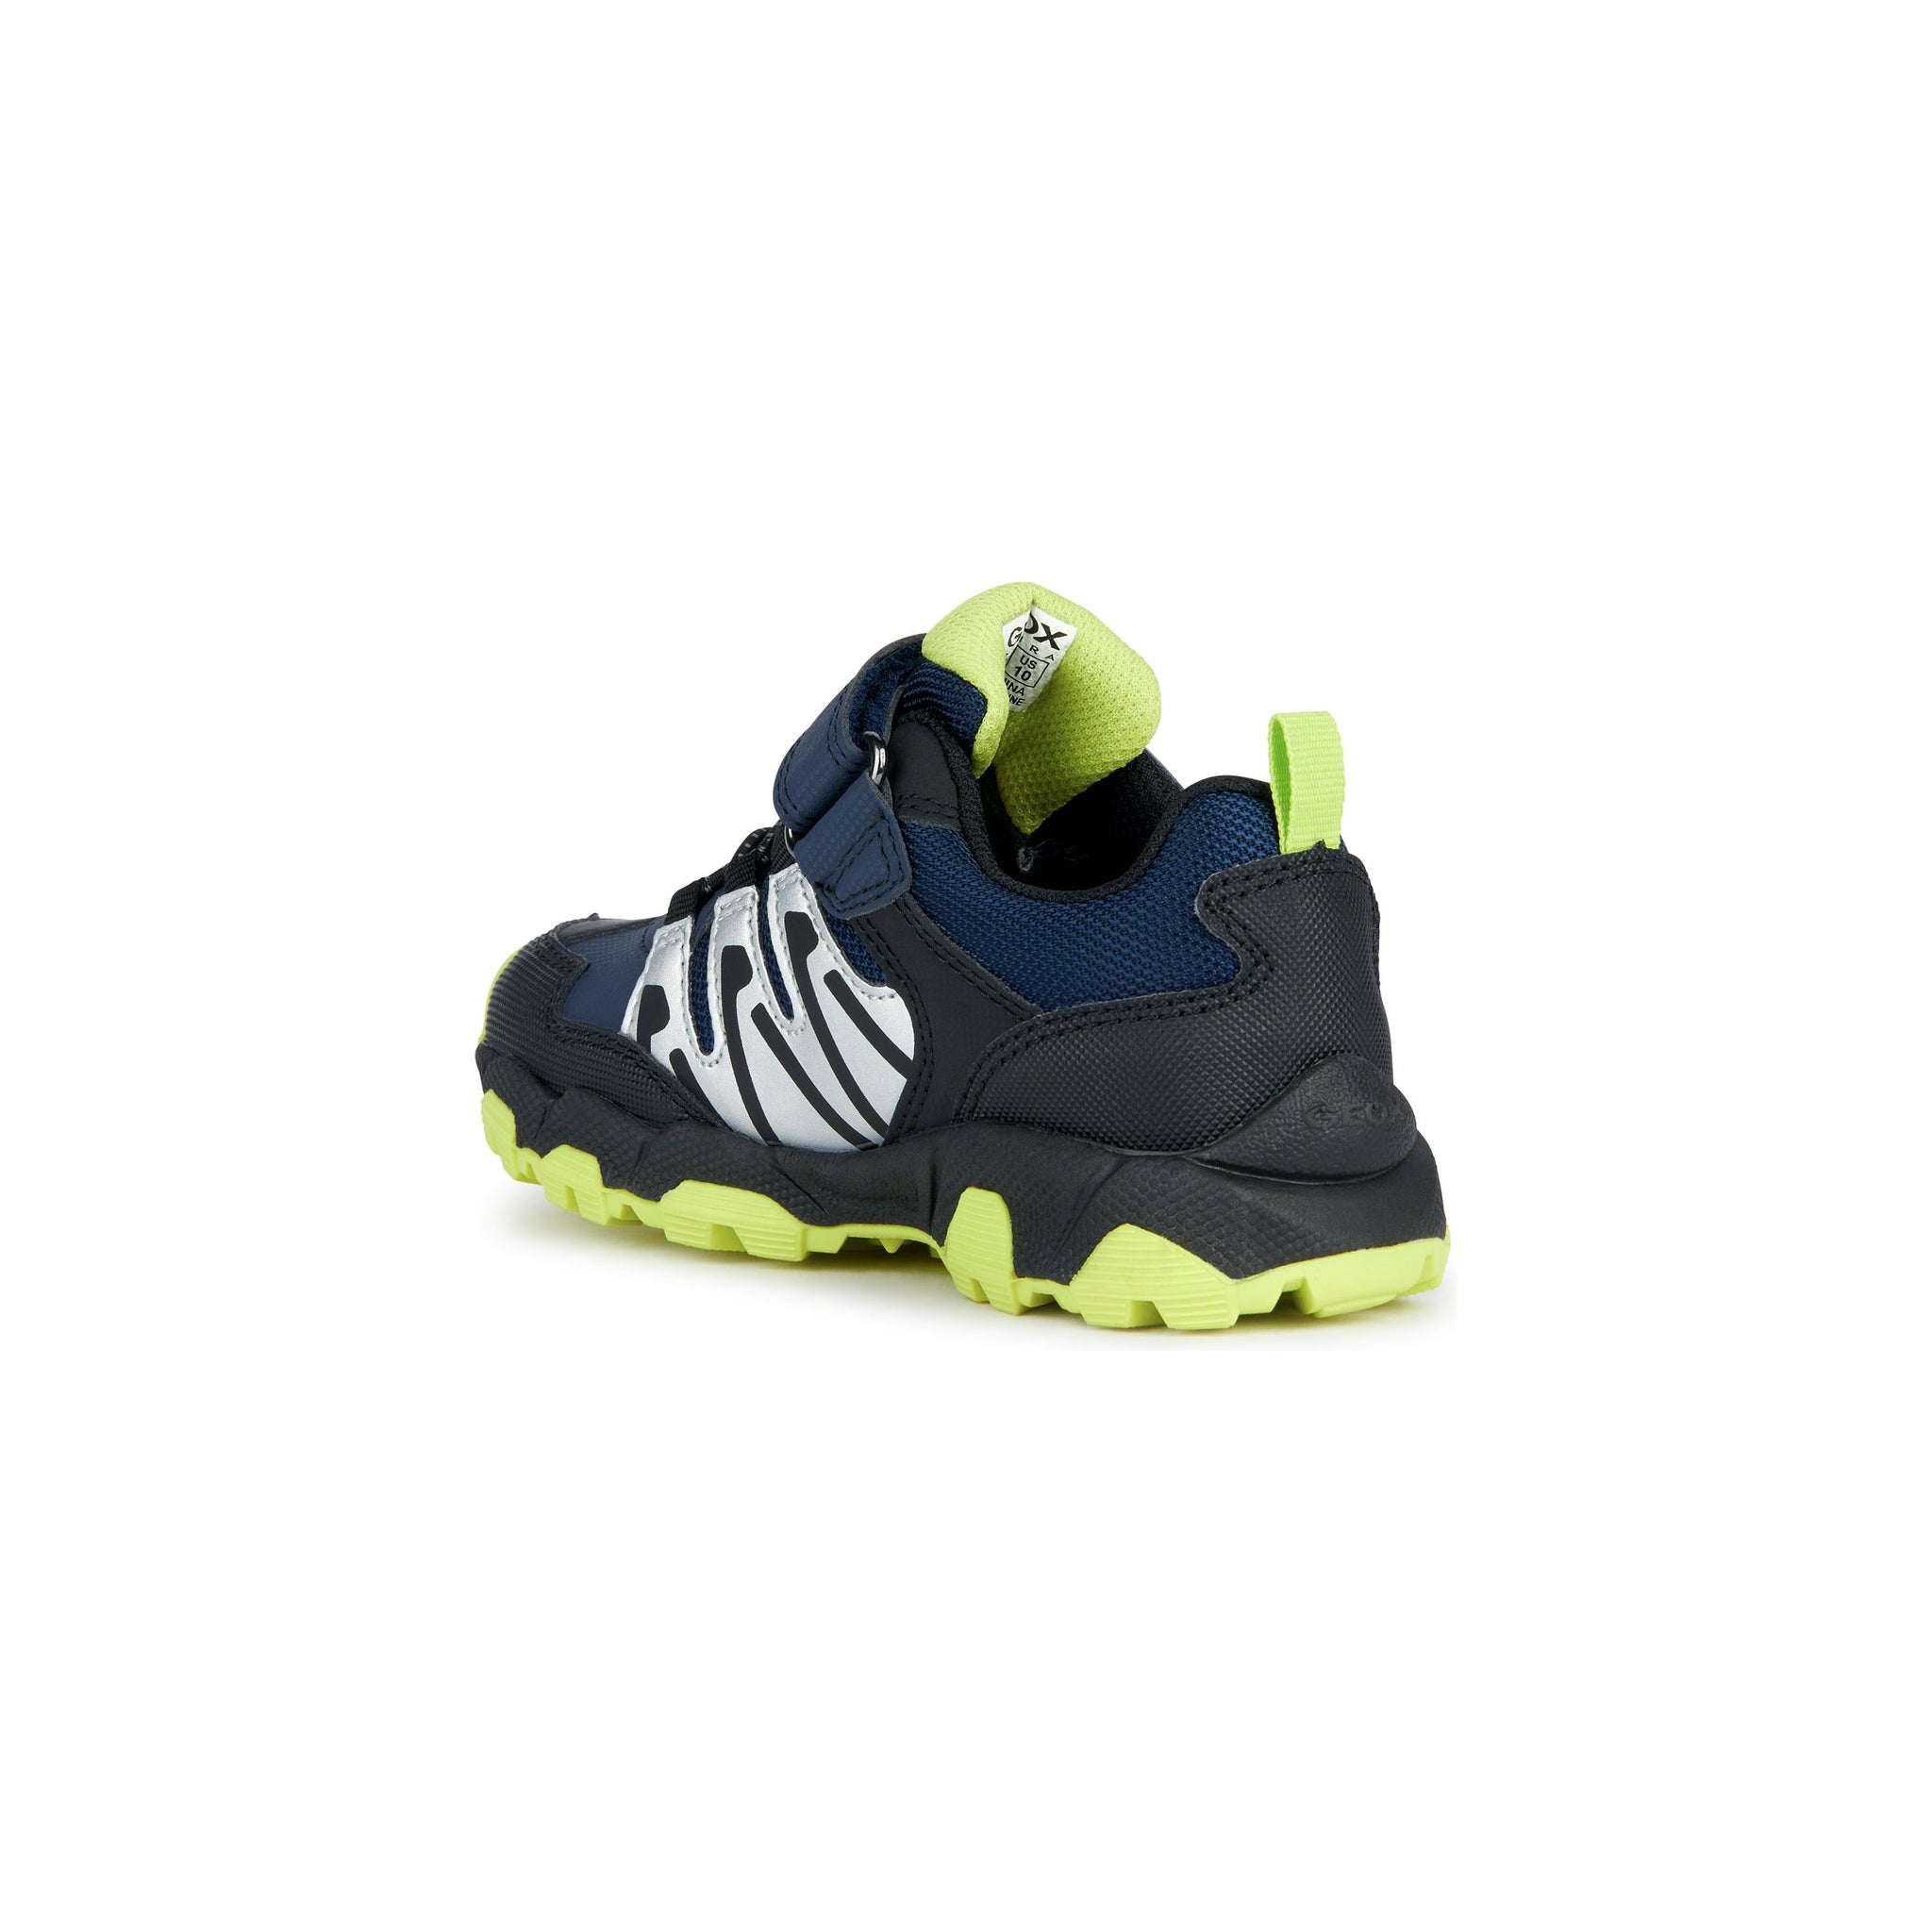 Geox Magnetar(J263ZB)- Boys Waterproof Velcro Trainer in Navy/Lime | Geox Shoes | Childrens Shoe Fitting | Wisemans | Bantry | West Cork | Ireland